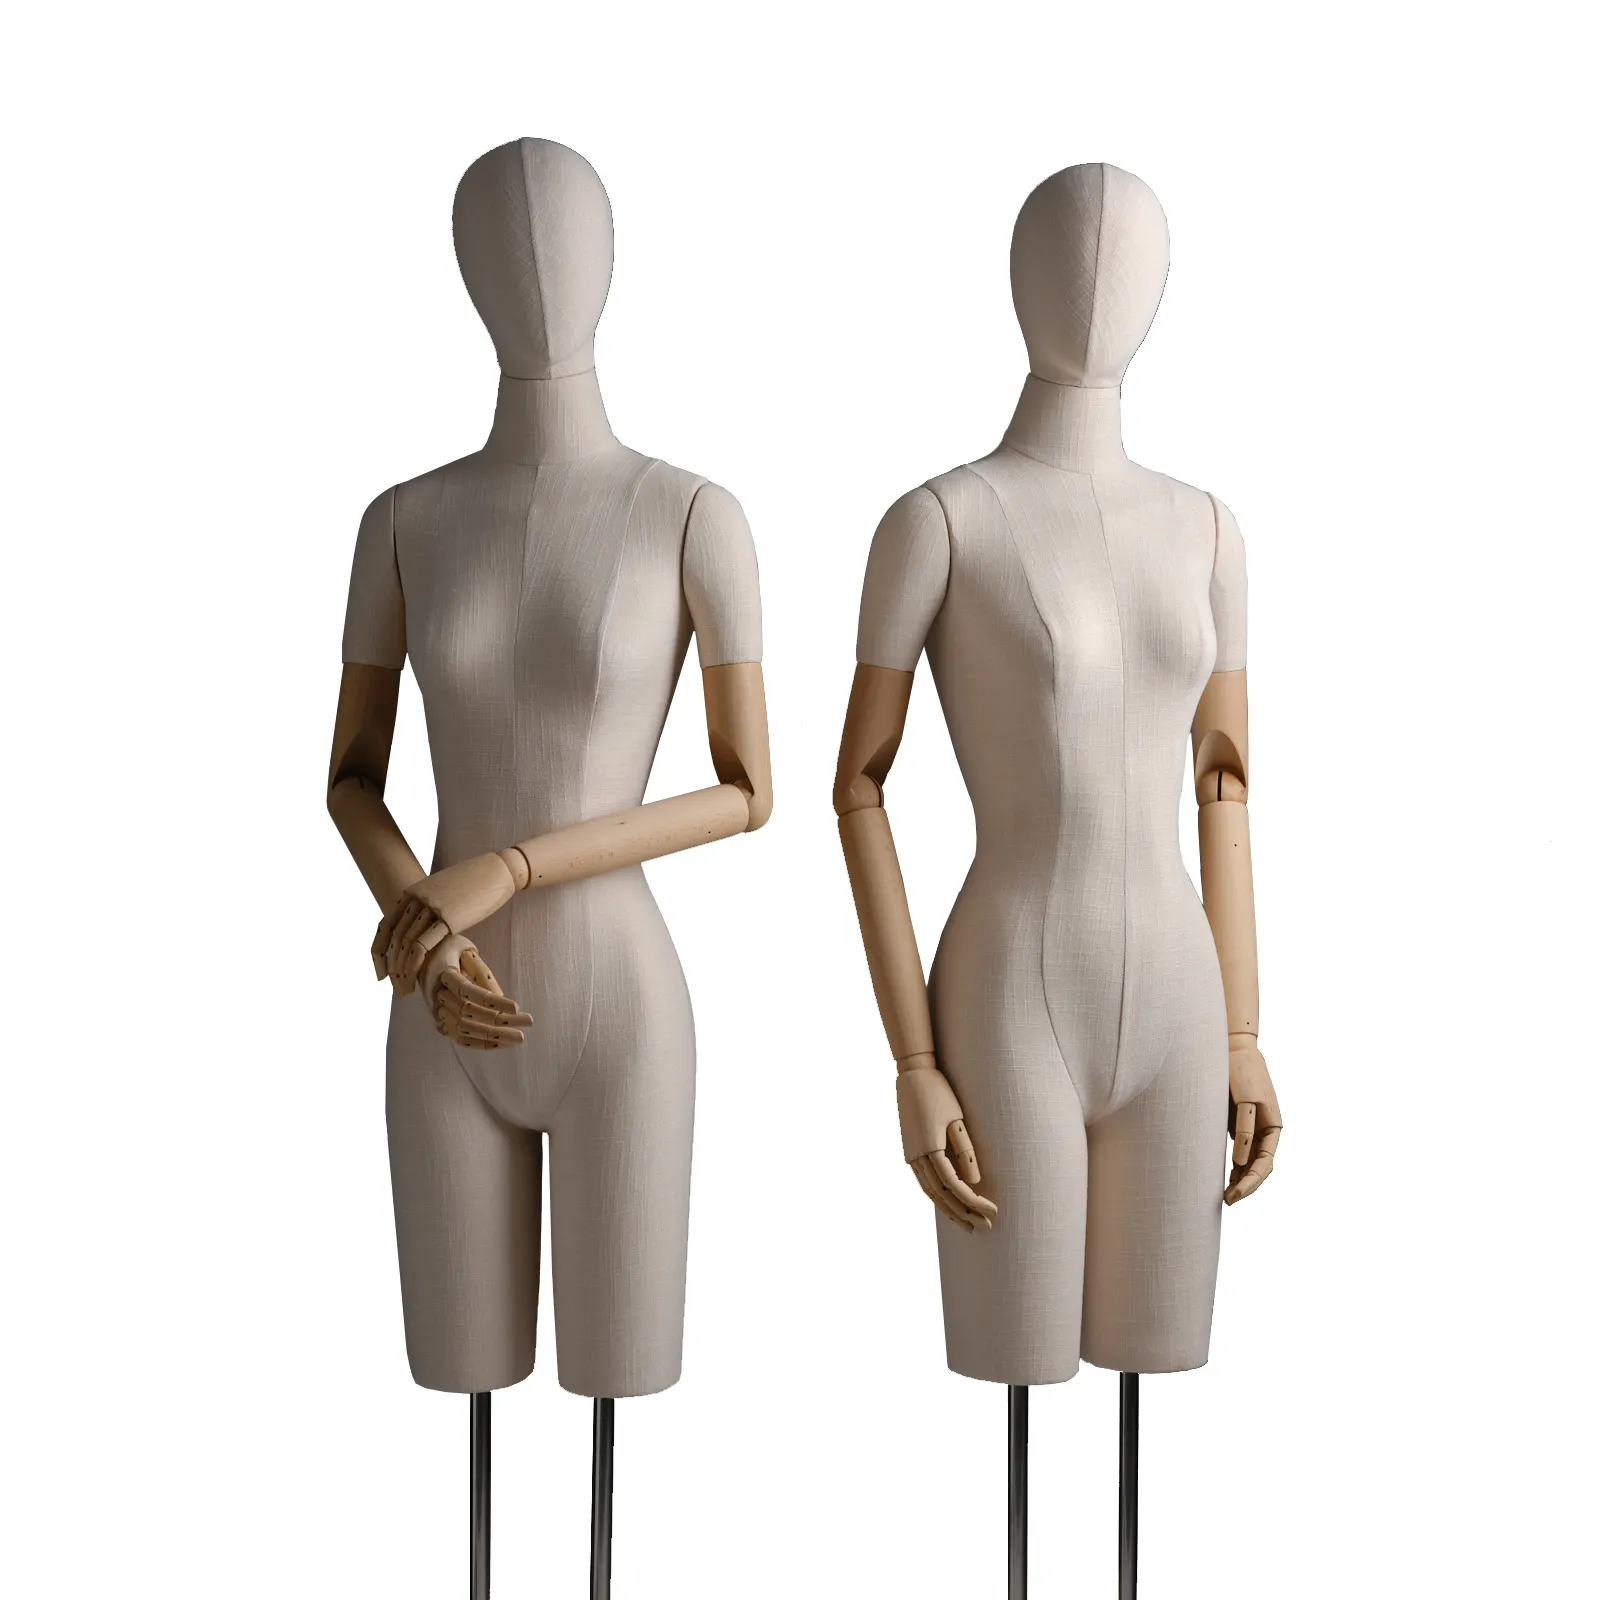 Clothing store high-grade Adjustable Female Mannequin Torso Standing Half Body PU Mannequins Female For Clothing Display